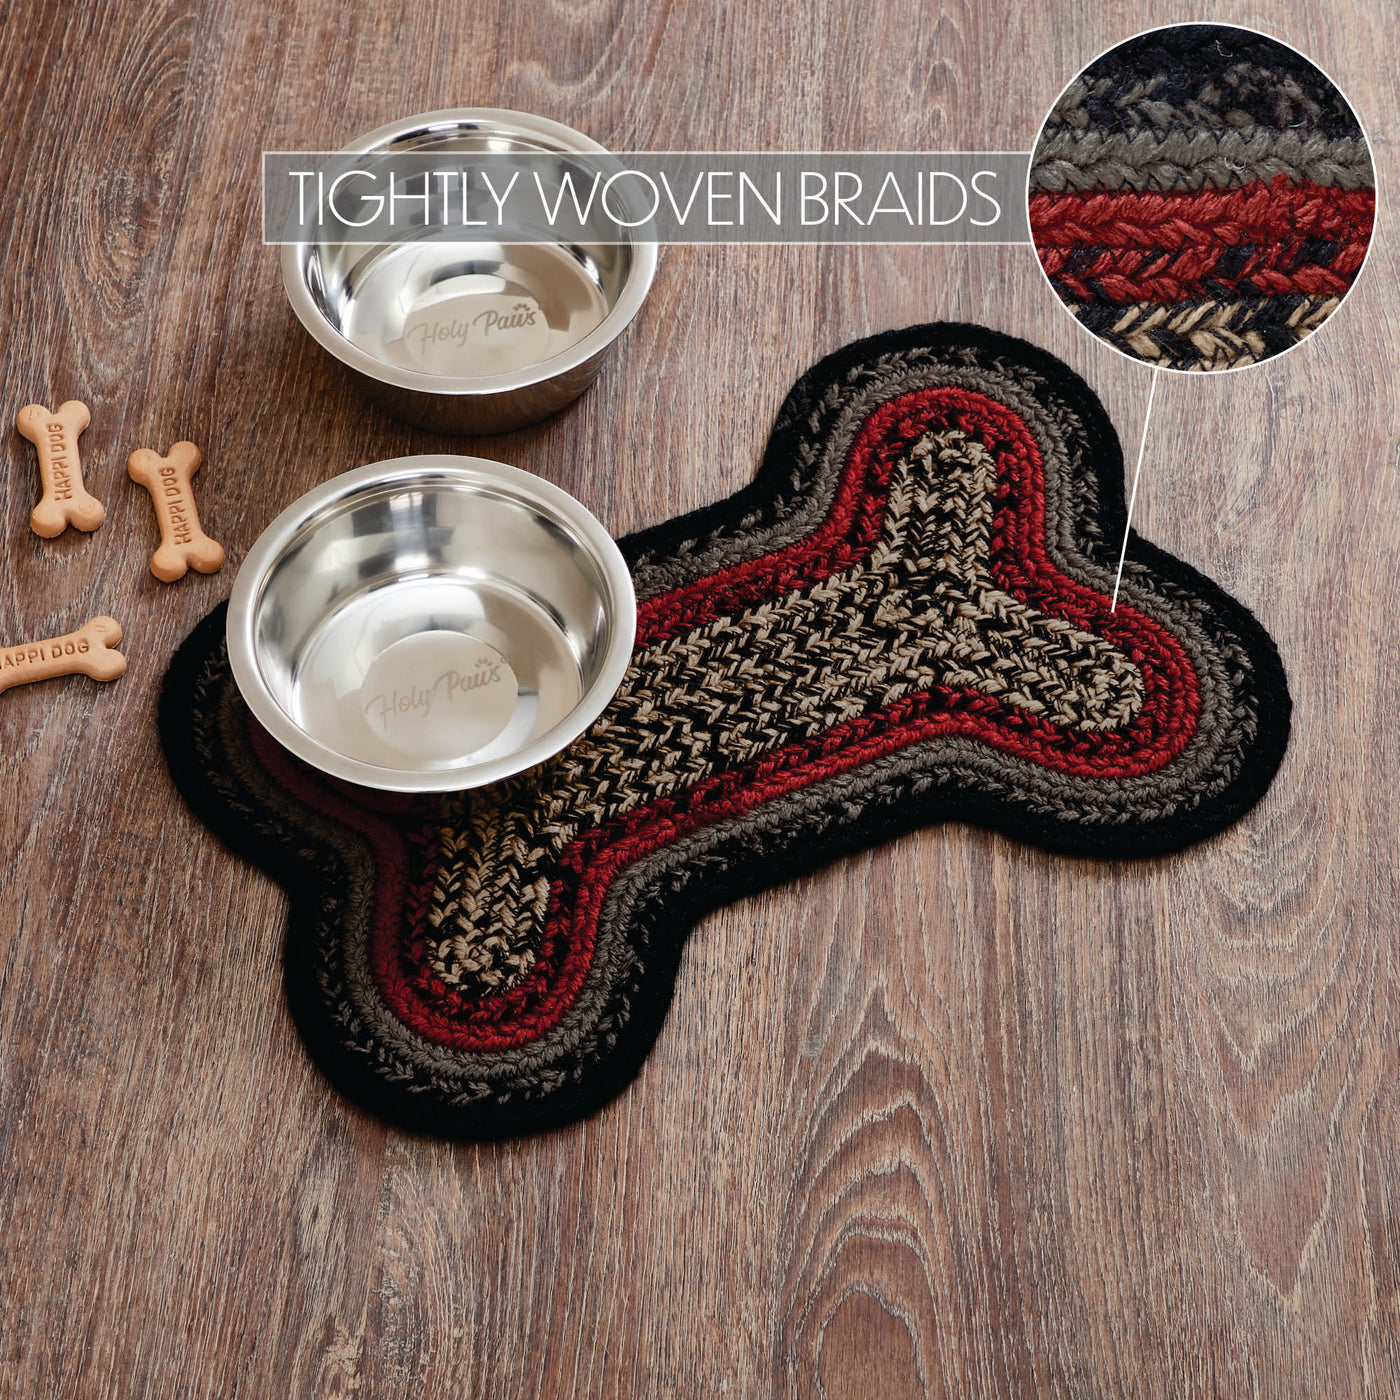 Small Bone Shaped Rug Red Black Gray Indoor/Outdoor